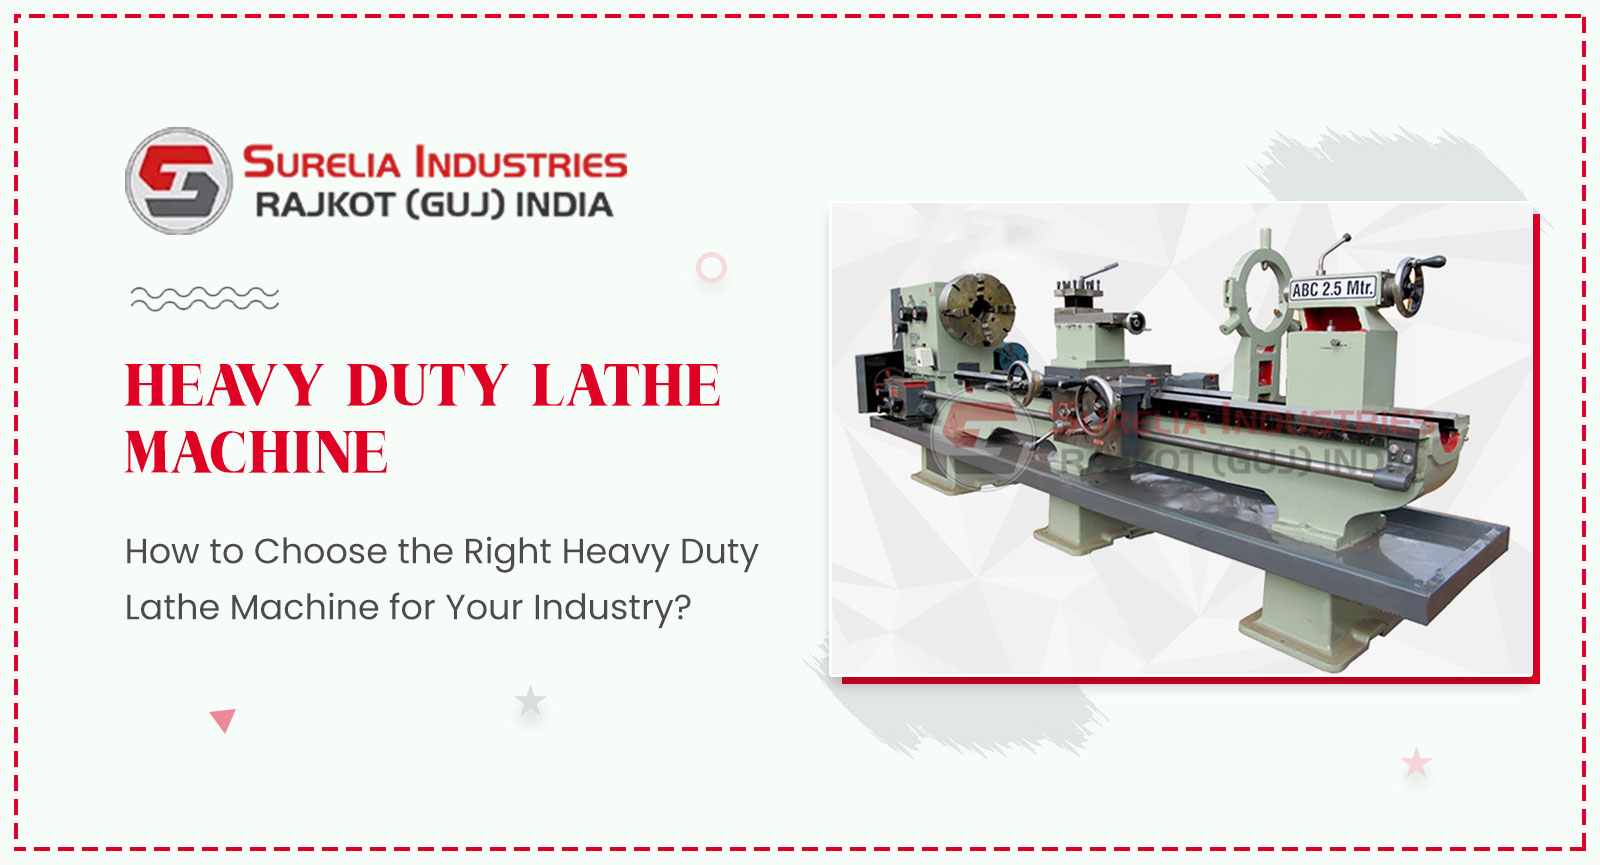 How to Choose the Right Heavy Duty Lathe Machine for Your Industry?, Lathe Machine